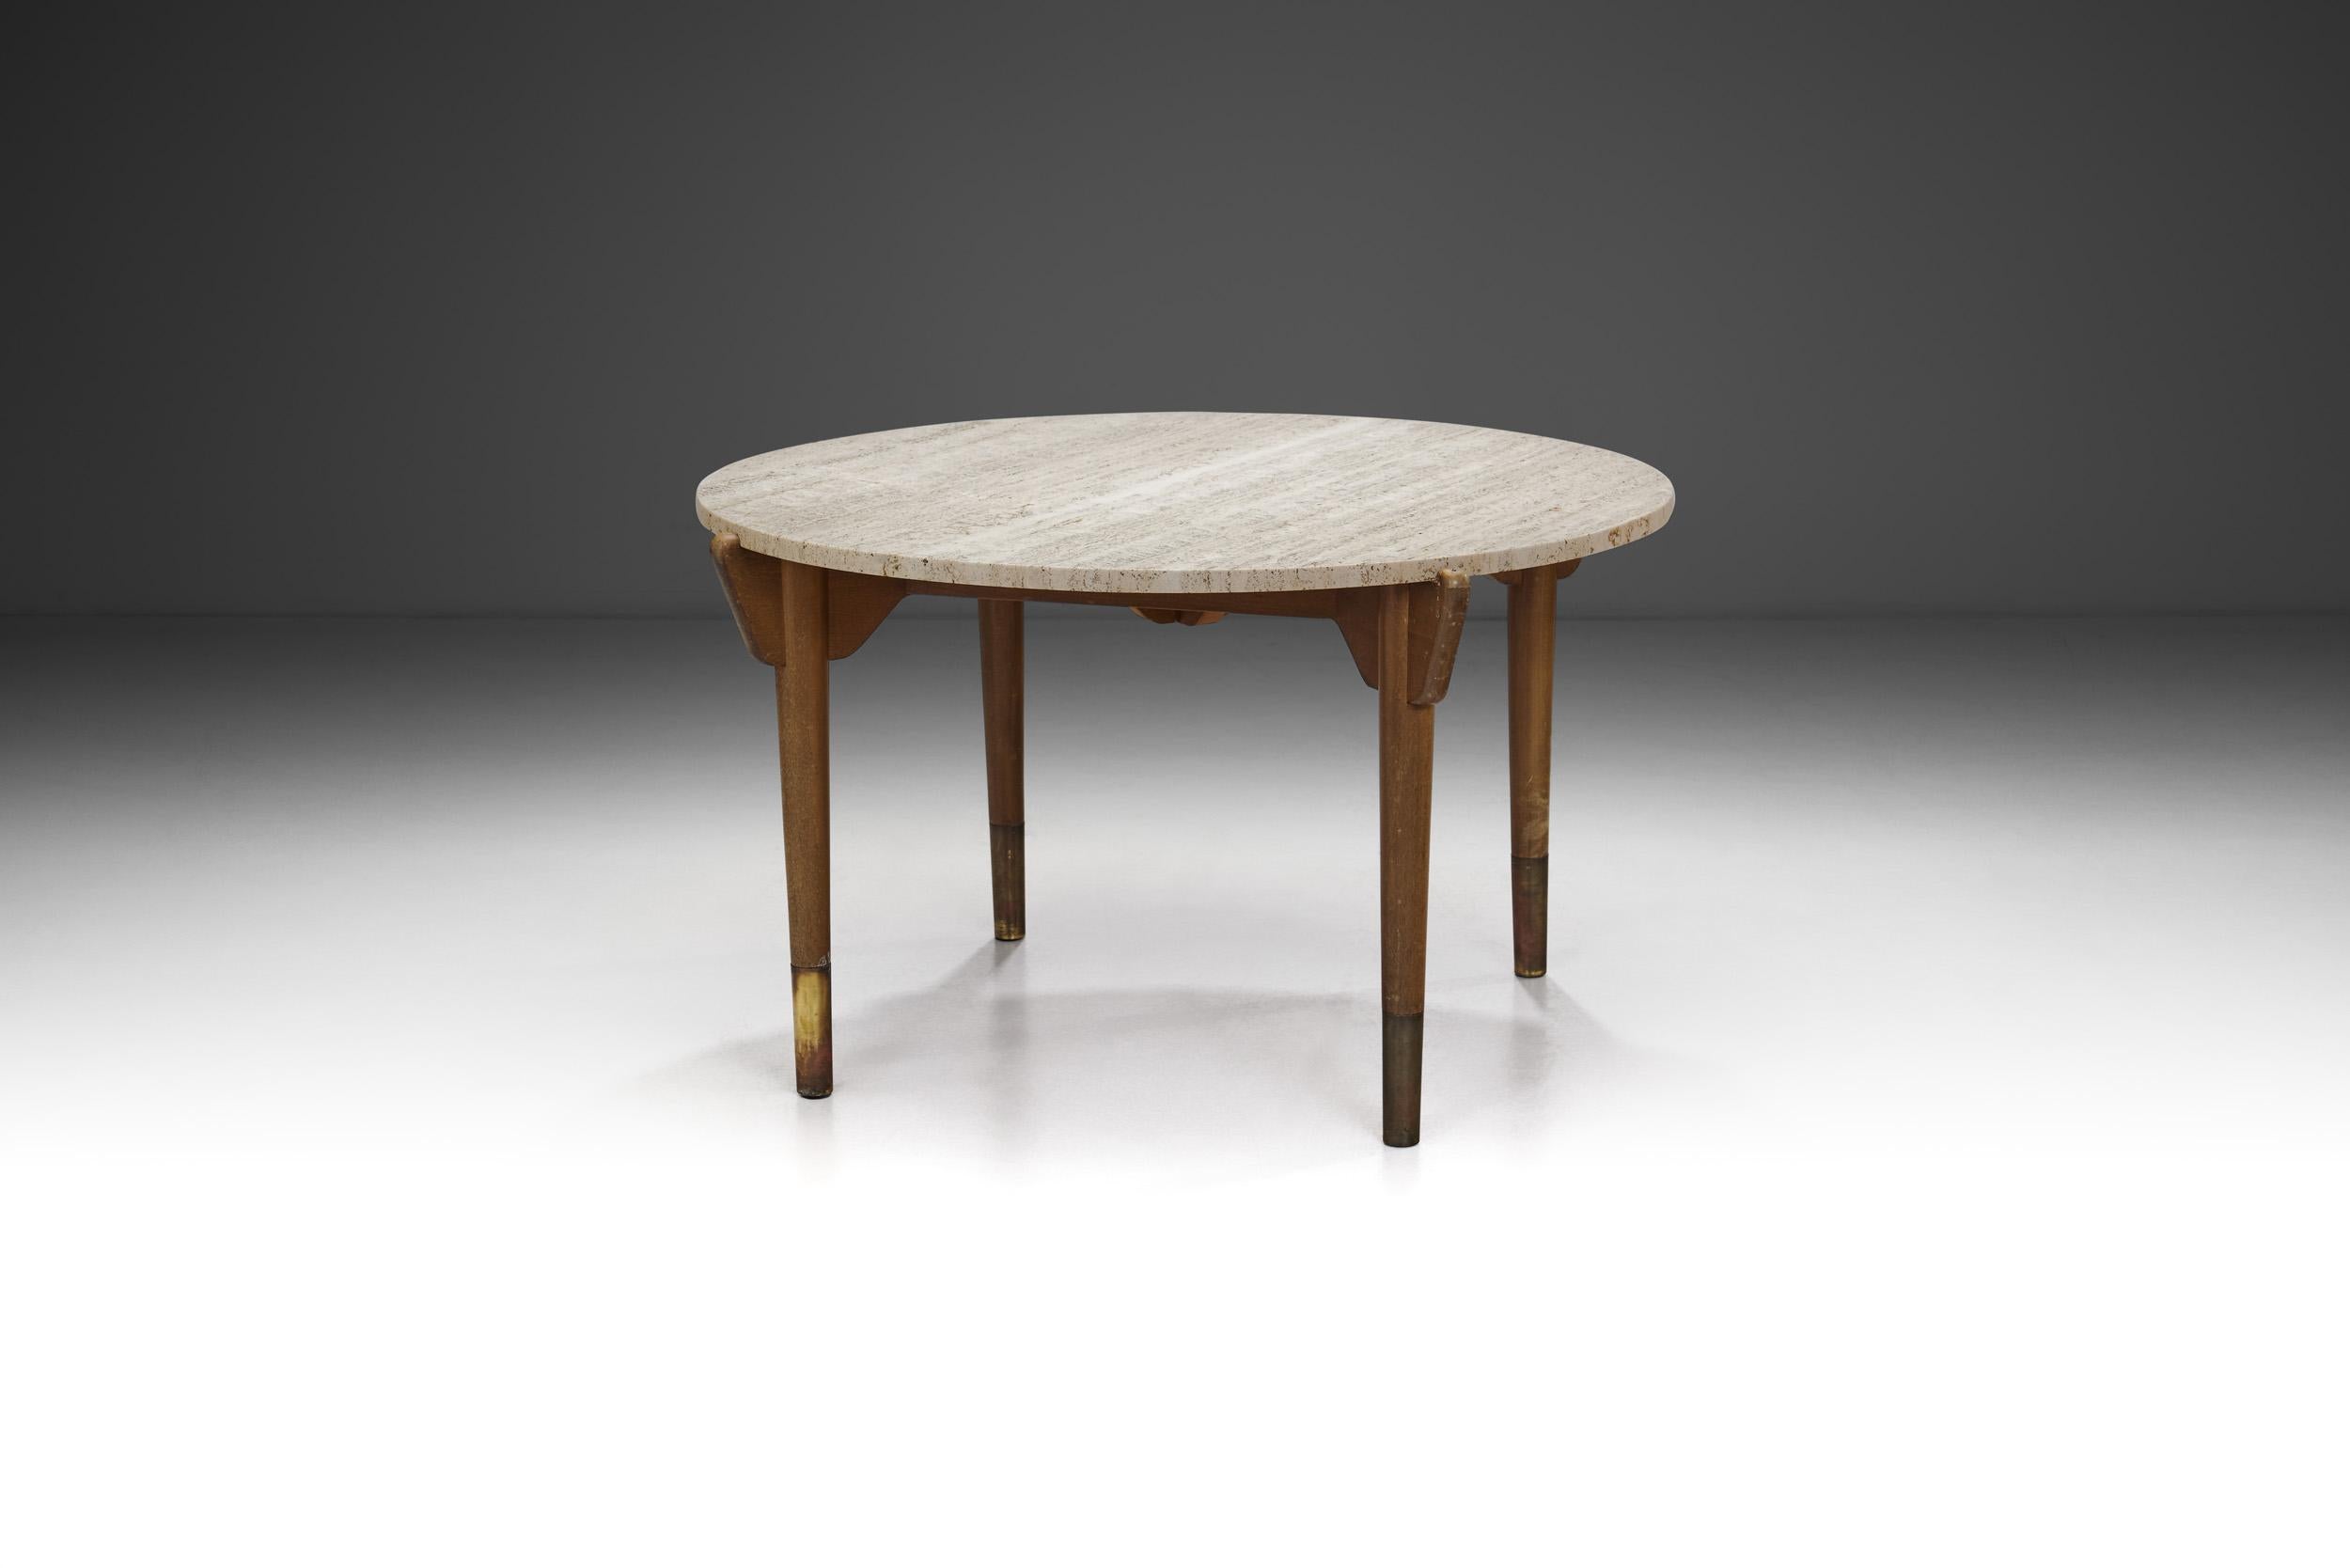 Mid-20th Century Swedish Modern Stained Beech Coffee Table with Travertine Top, Sweden 1940s For Sale